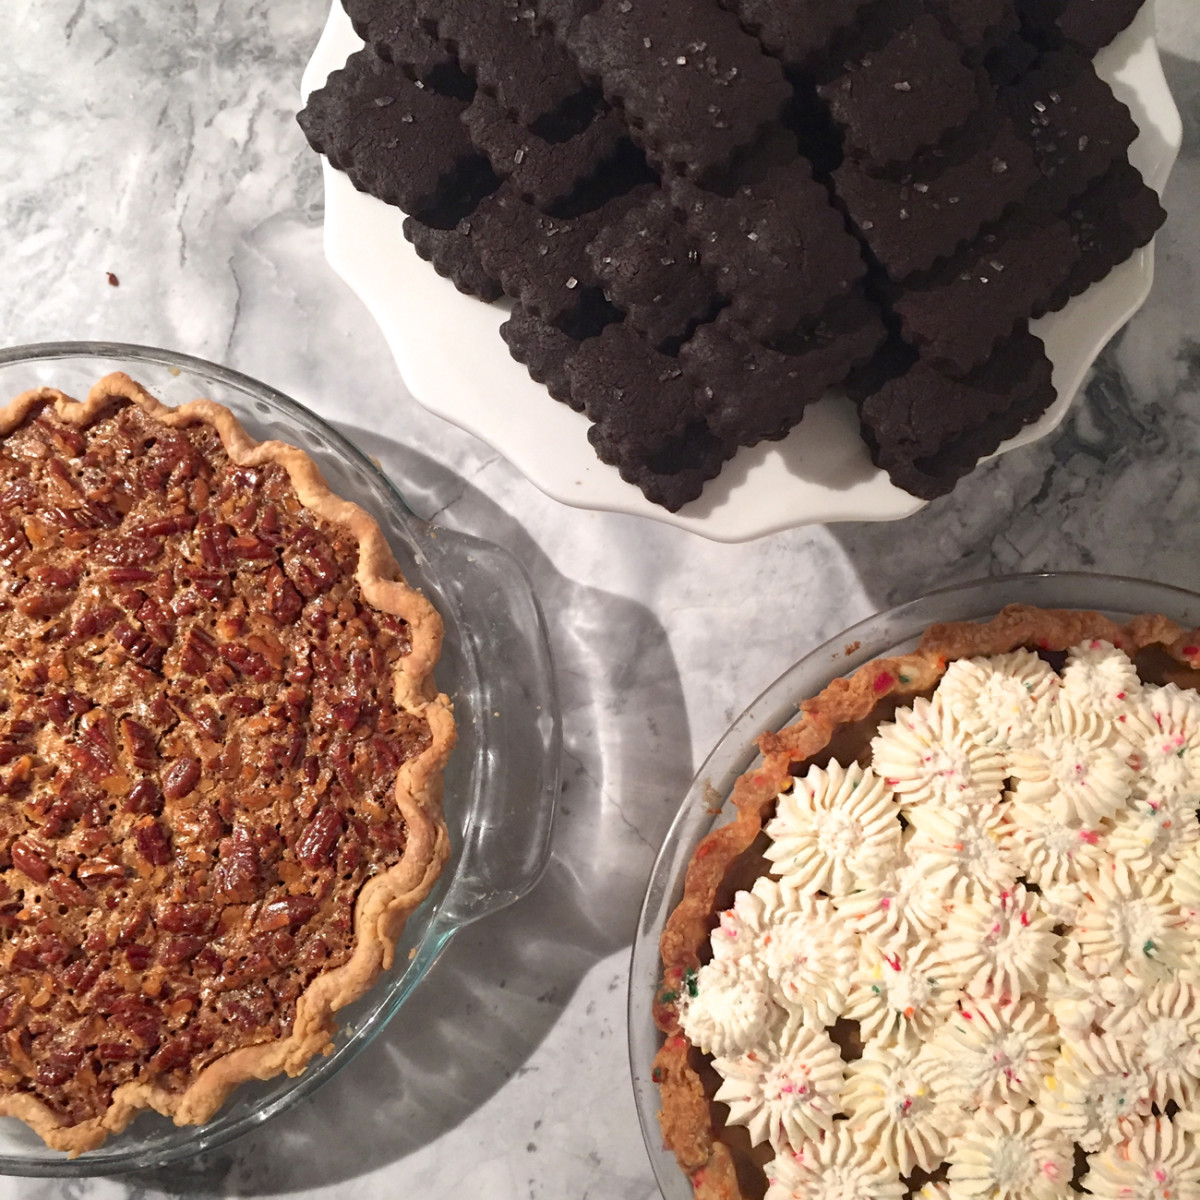 {Desserts from last week's meal: Cook's Illustrated pecan pie, my mom's funfetti pumpkin pie, Miette's chocolate sables}